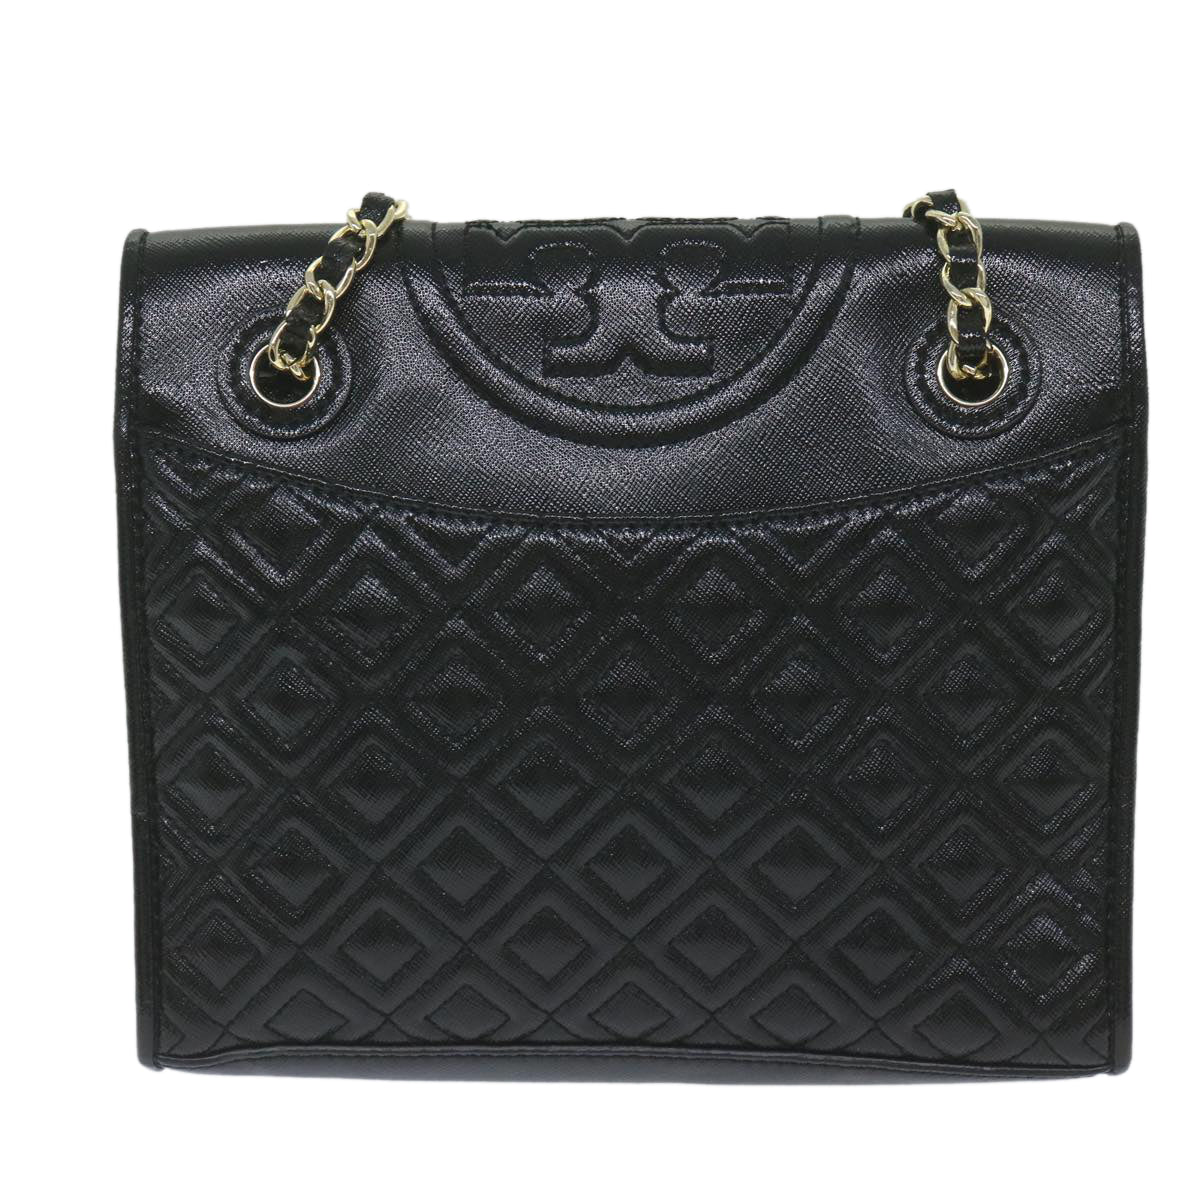 TORY BURCH Quilted Chain Shoulder Bag PVC Leather Black Auth am5283 - 0